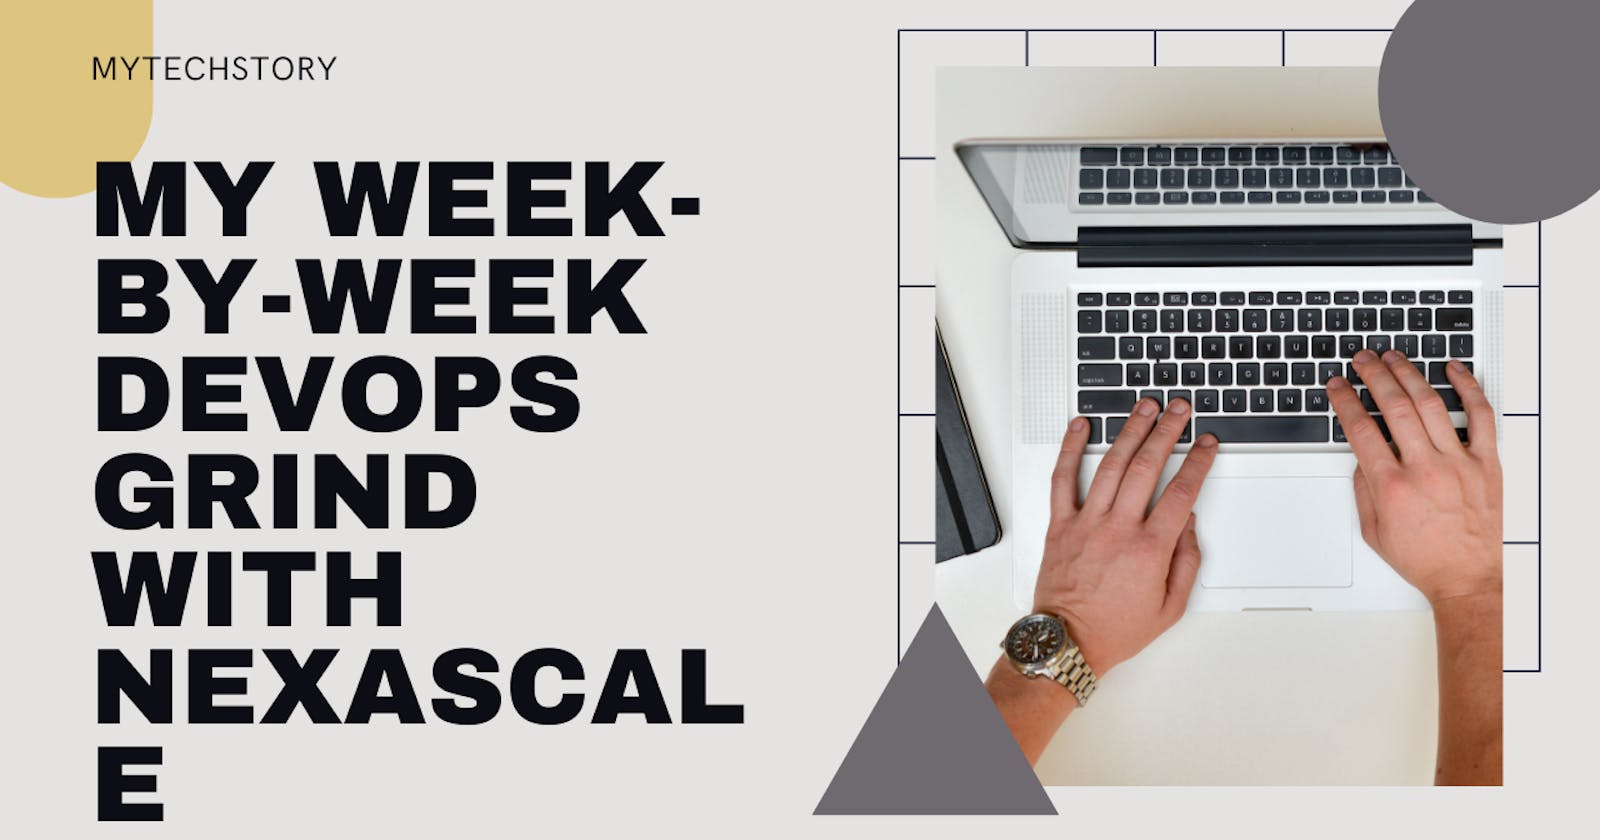 Git, Glory, and Getting Sh*t Done: My Week-by-Week DevOps Grind with Nexascale